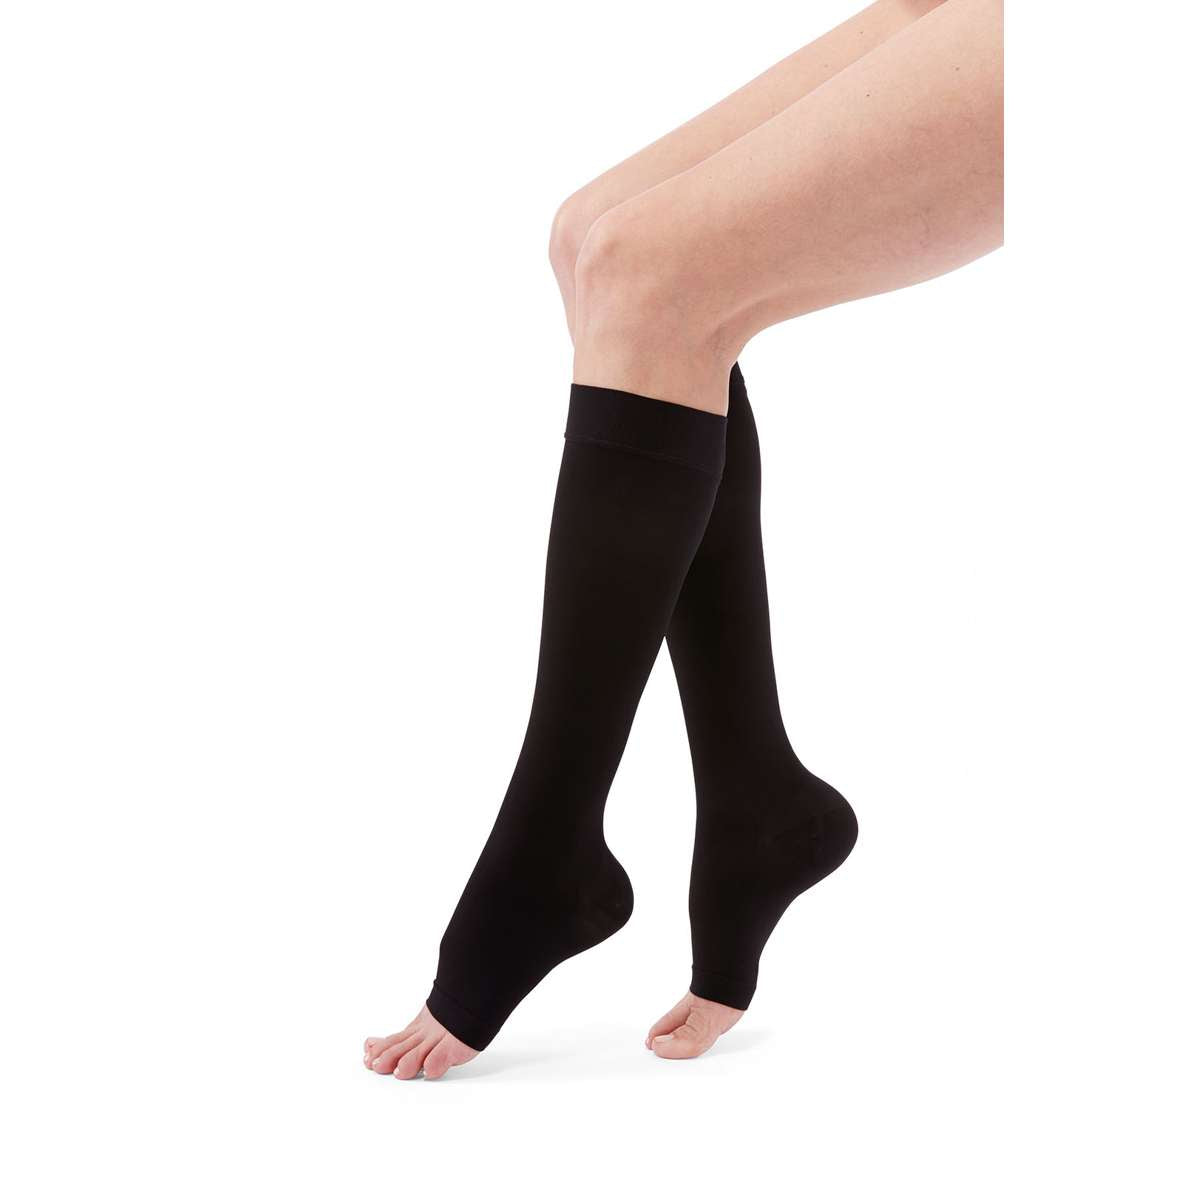 duomed advantage 20-30 mmHg Calf High Open Toe Compression Stockings